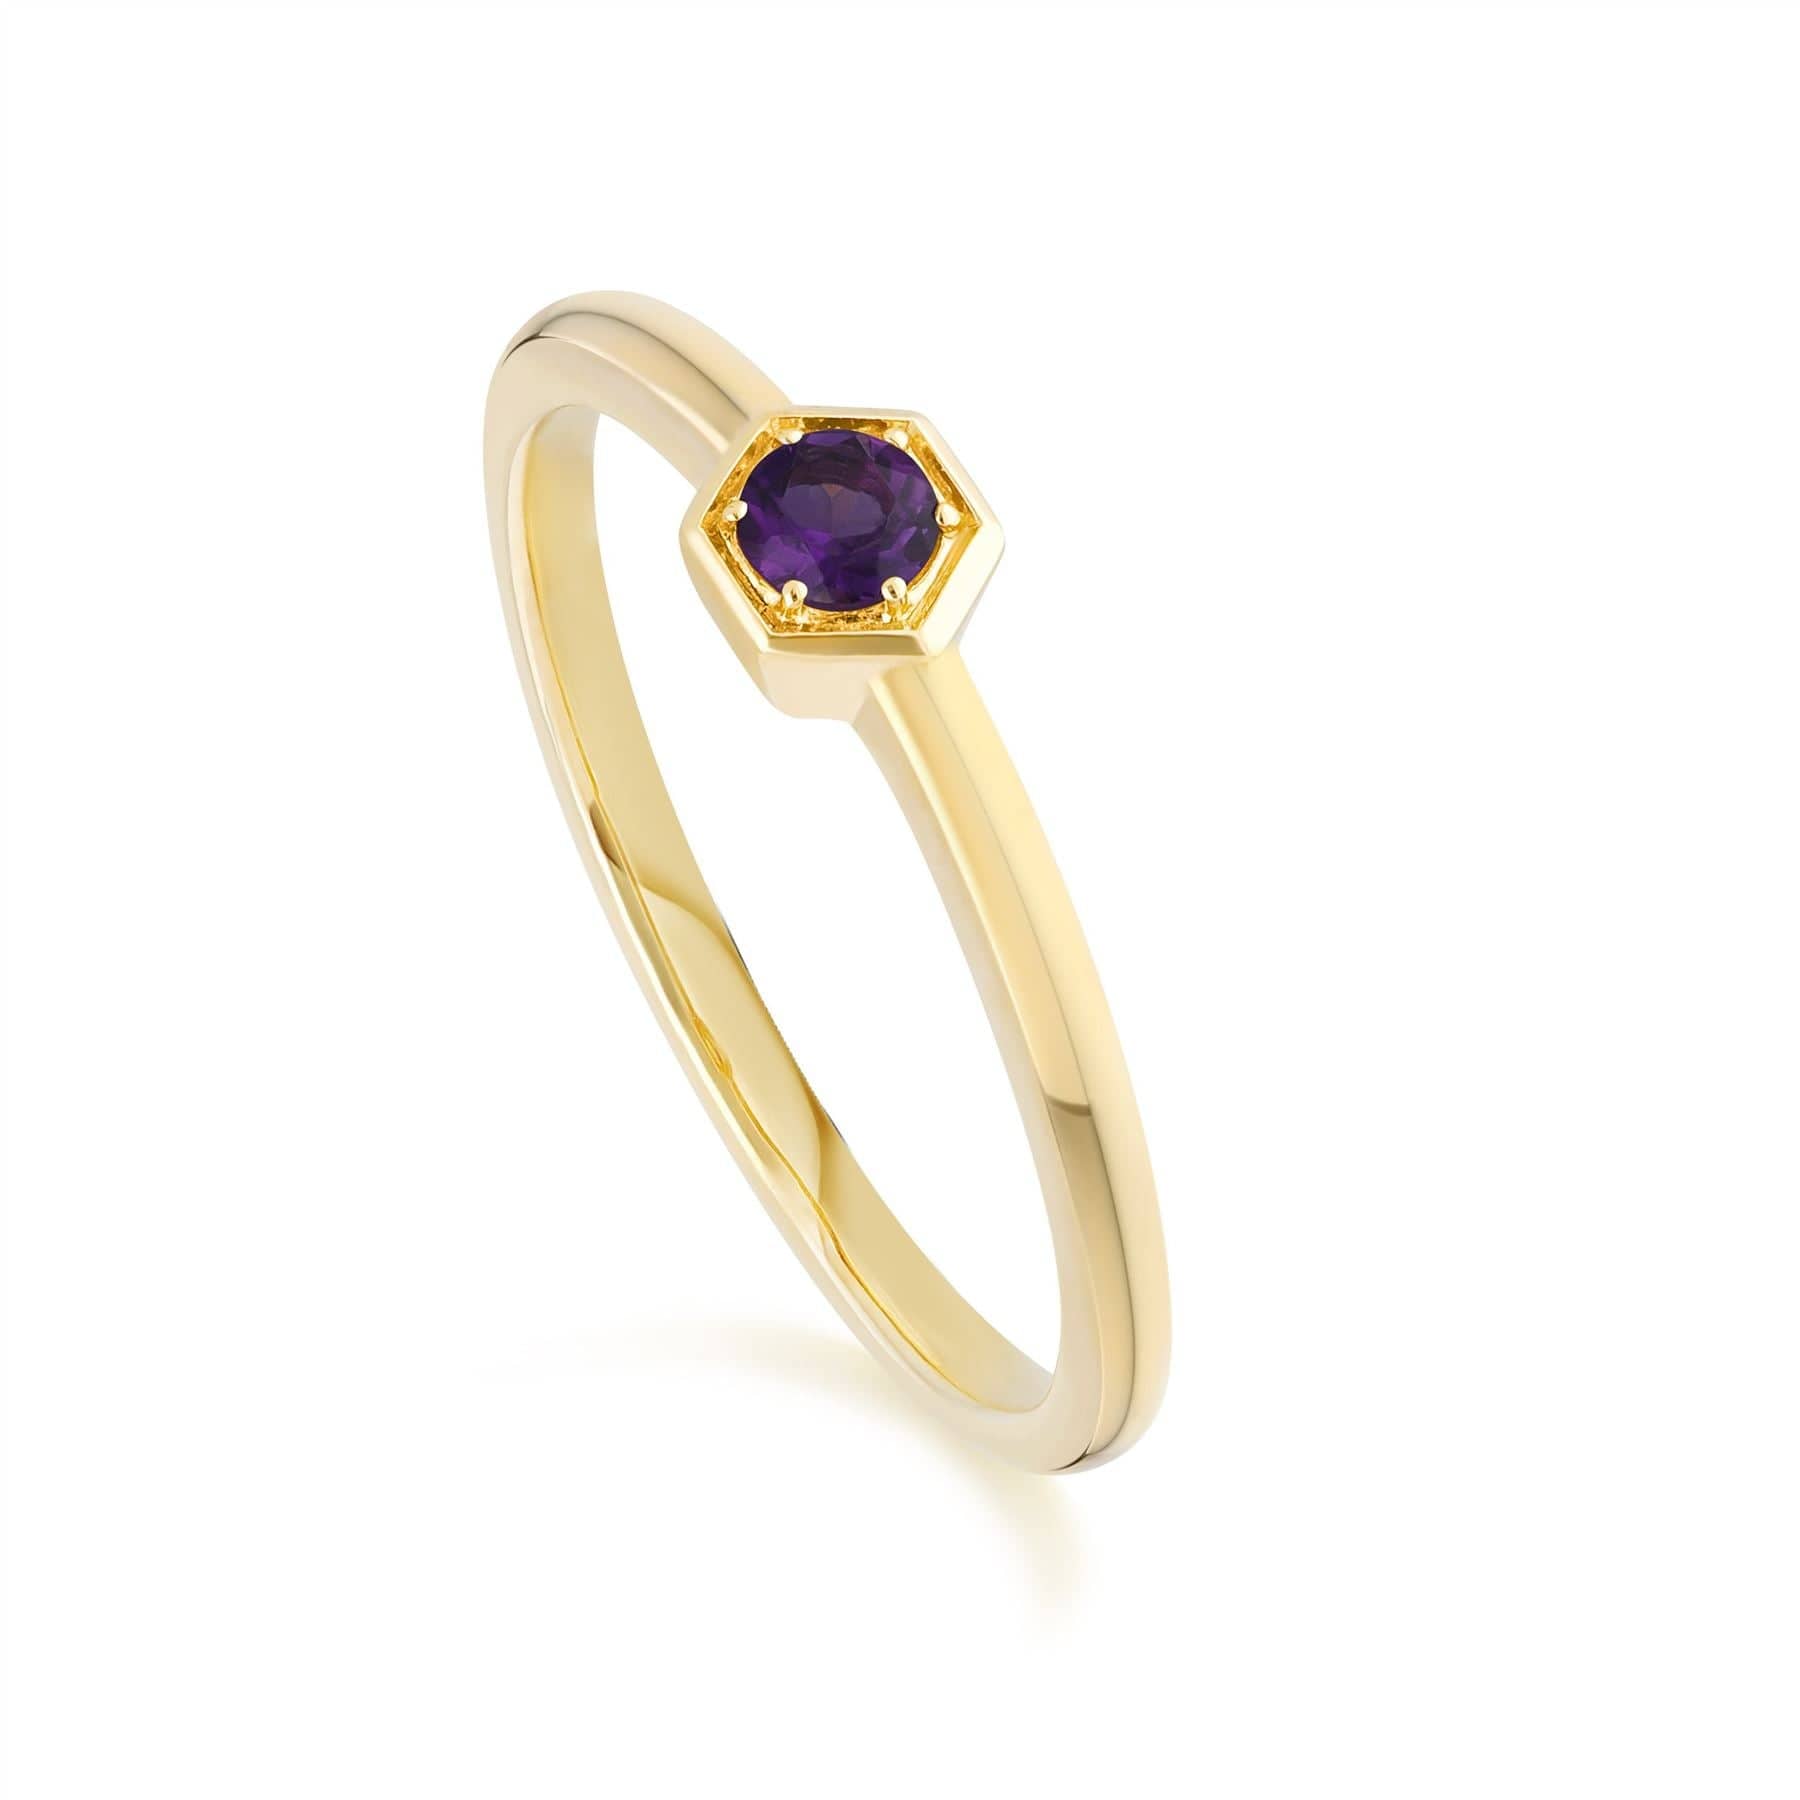 135R1837039 Honeycomb Inspired Amethyst Solitaire Ring in 9ct Yellow Gold 1